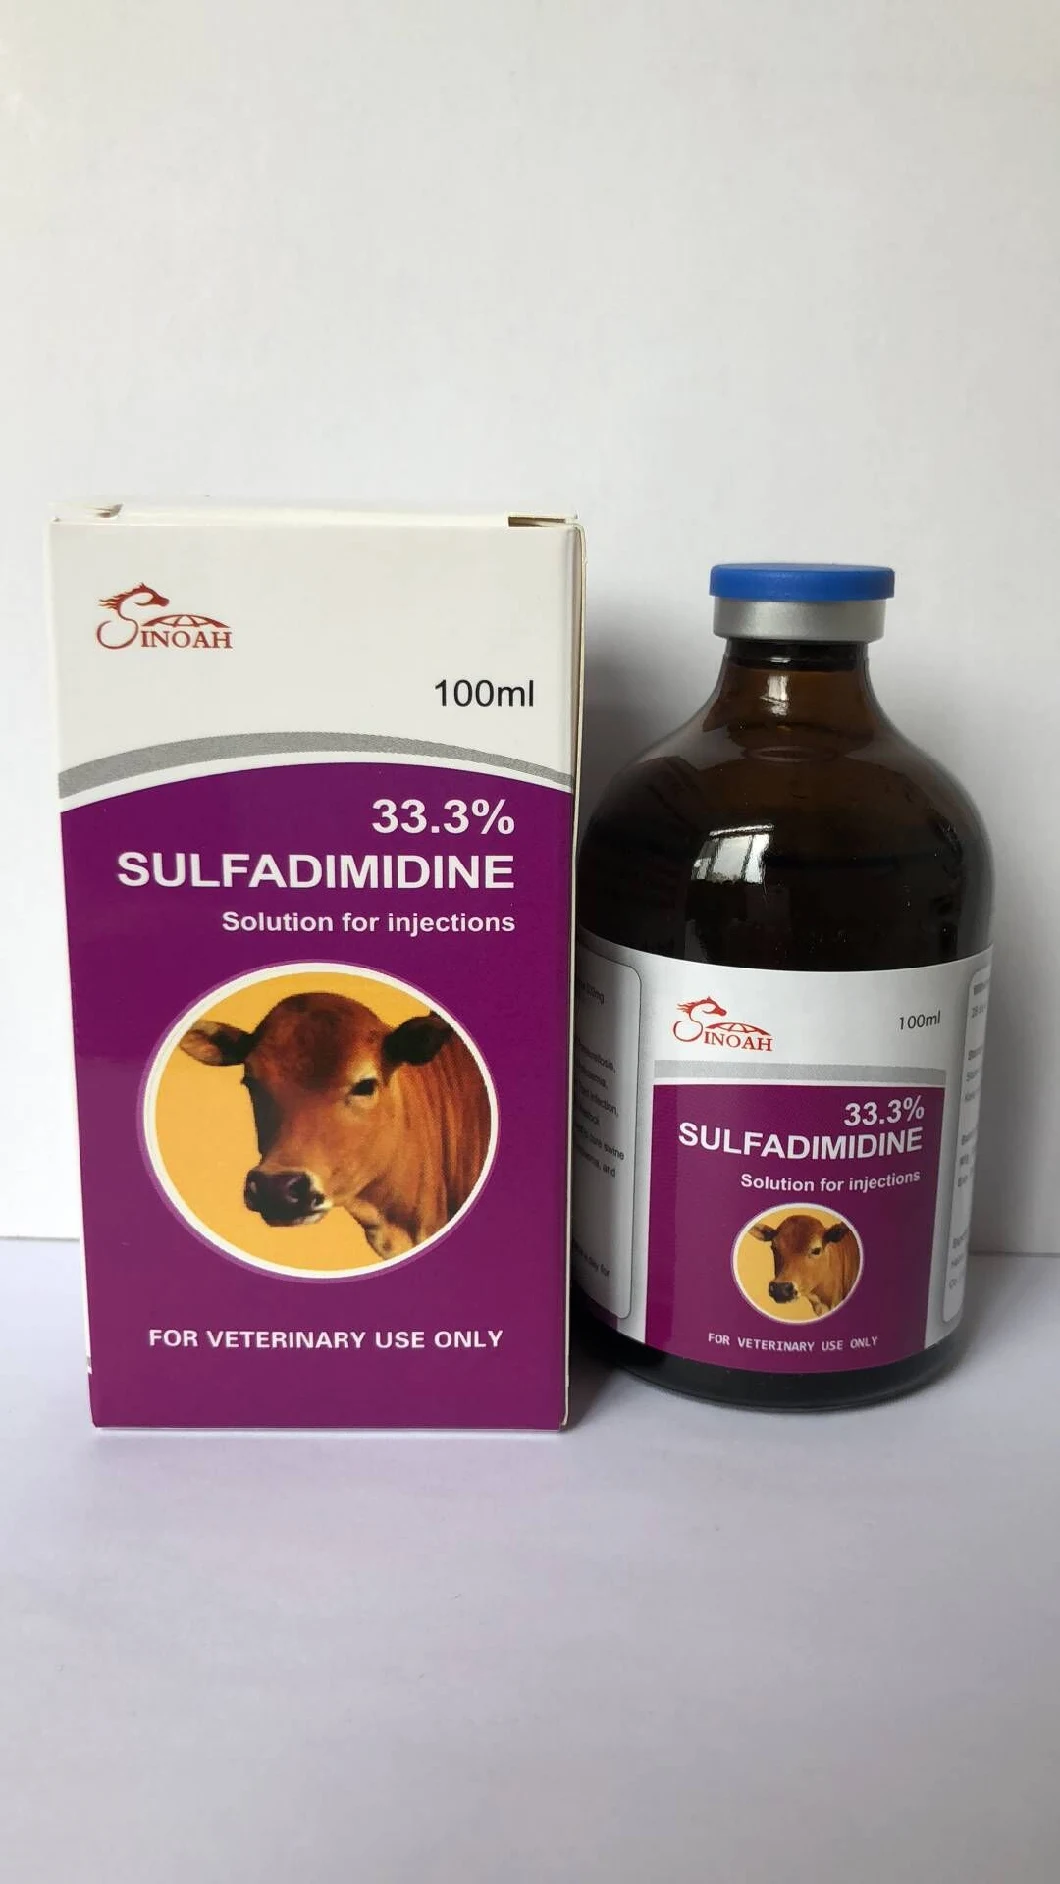 1% Ivermectin Injection for Chicken Good Manufacturing Practice Ivermectin Injection